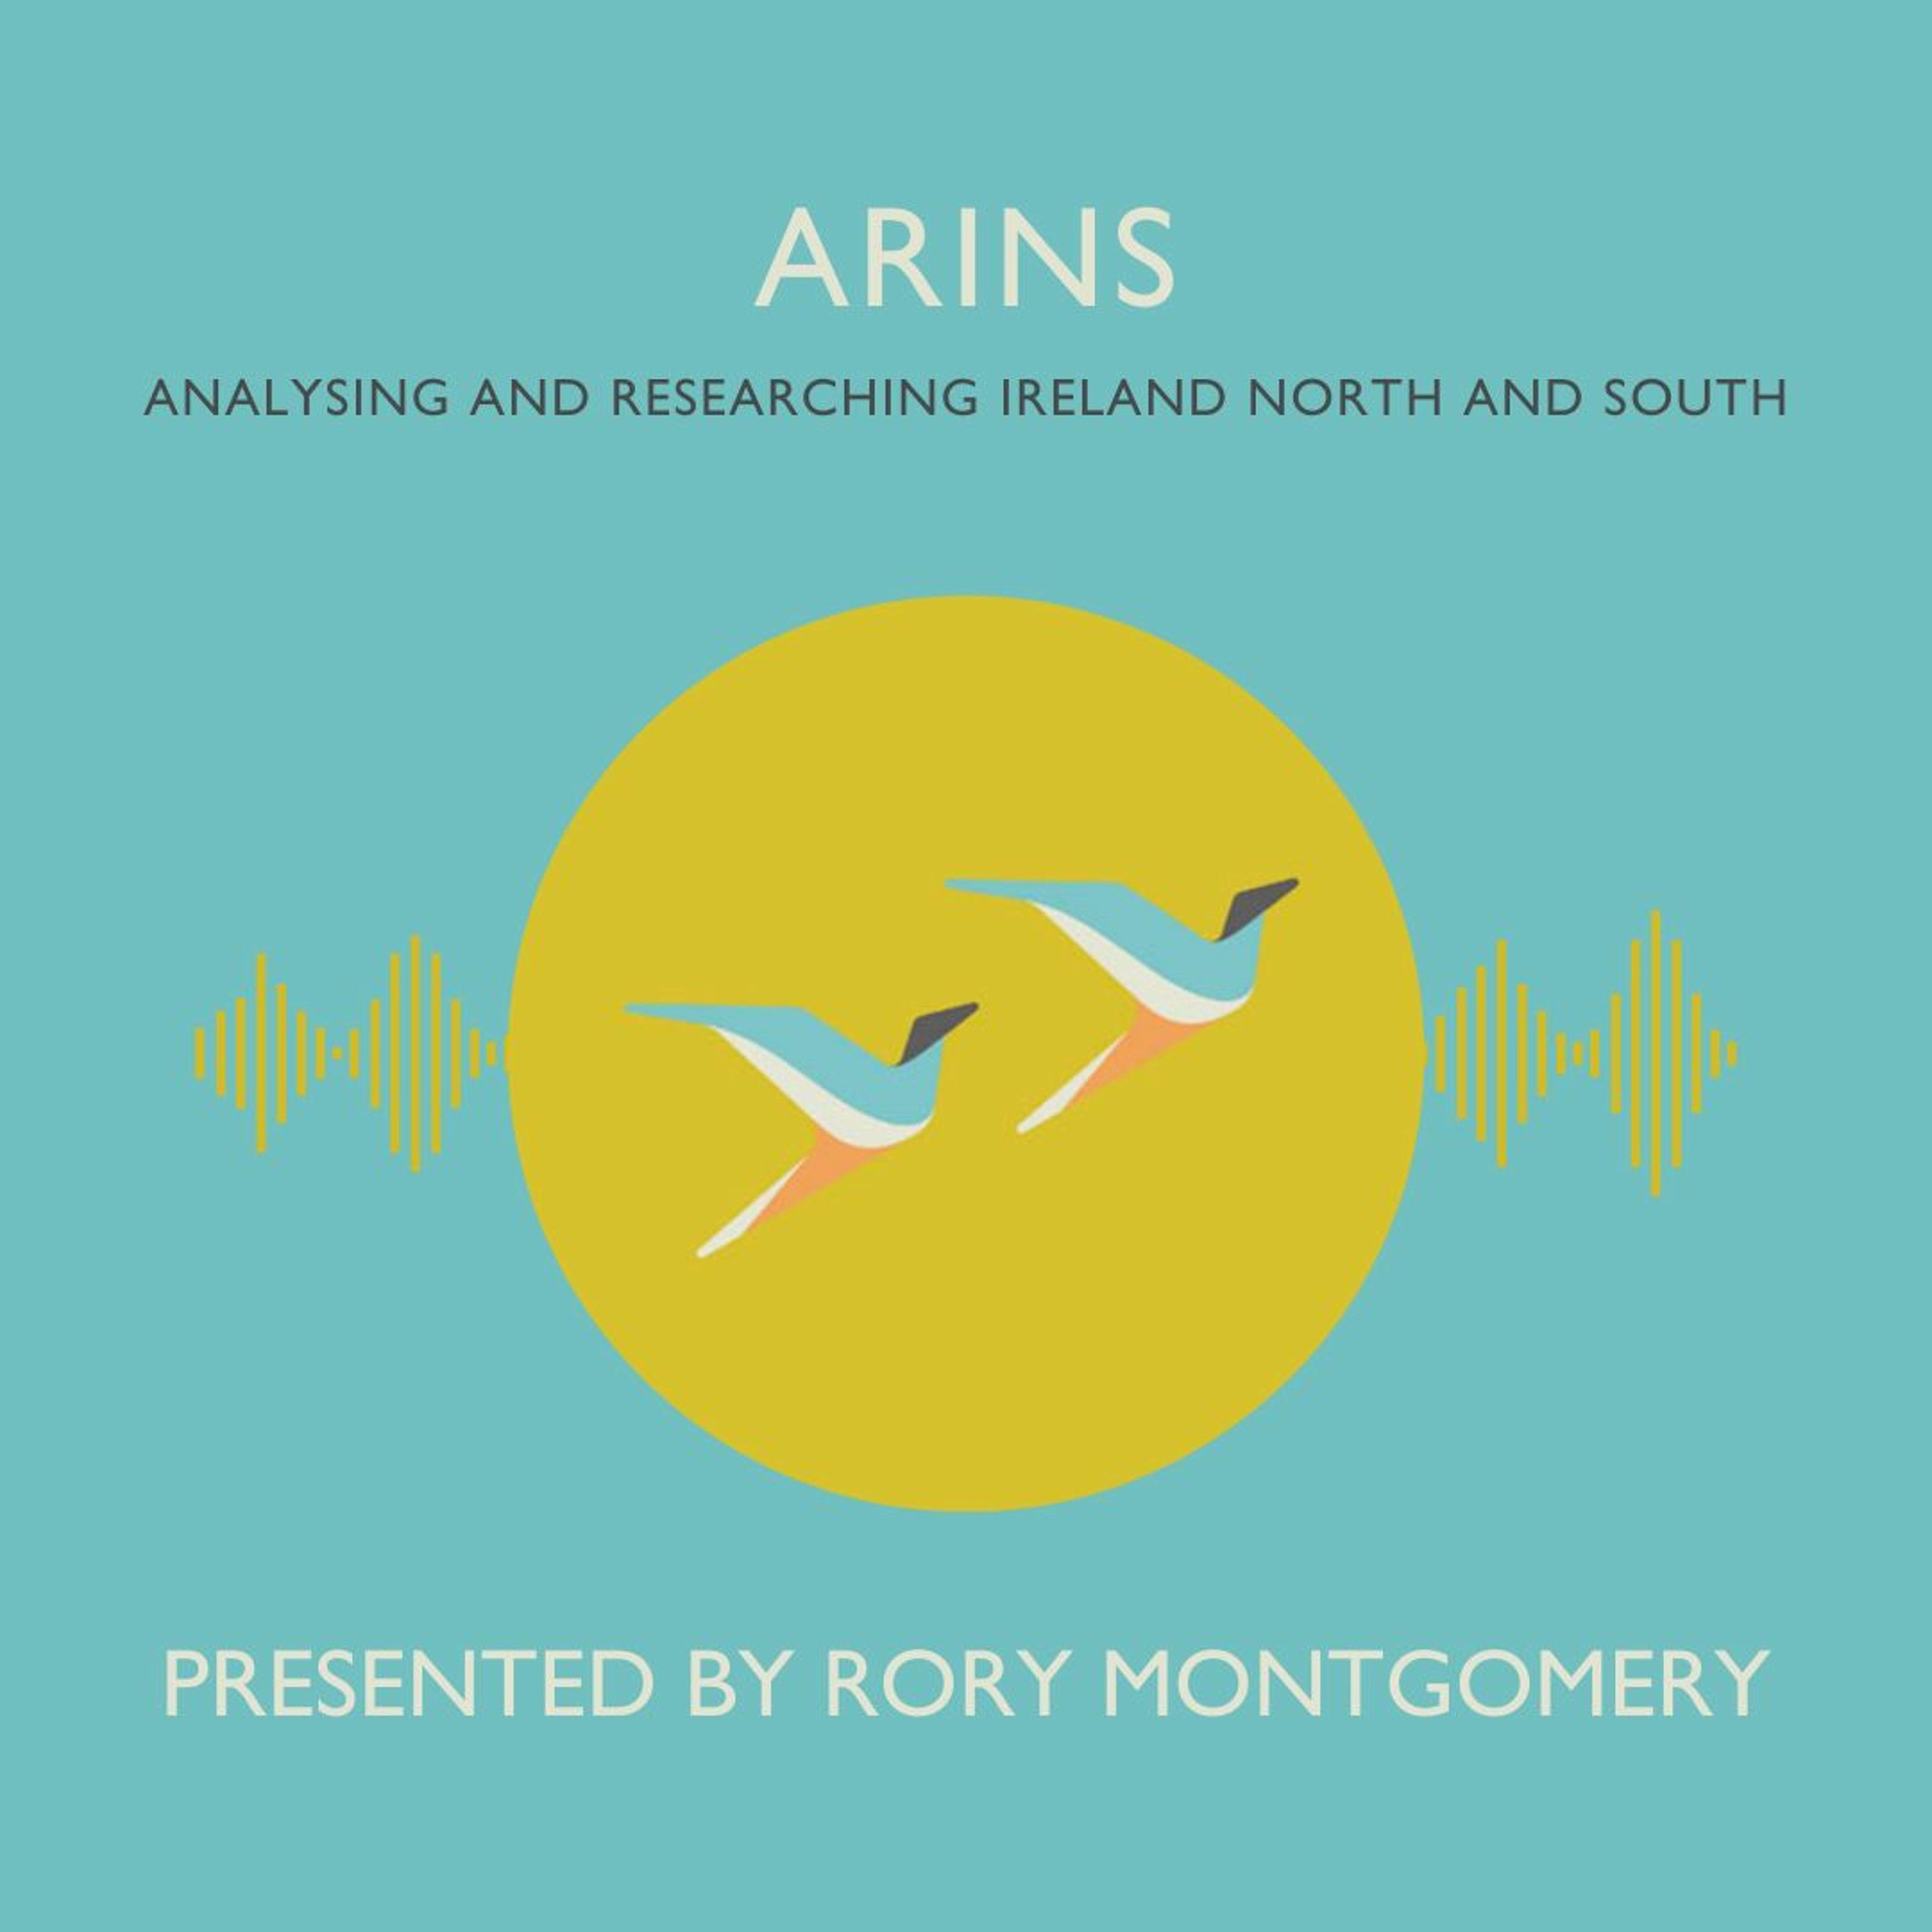 ARINS podcast episode 12: Participatory Constitutionalism and the Agenda for Change